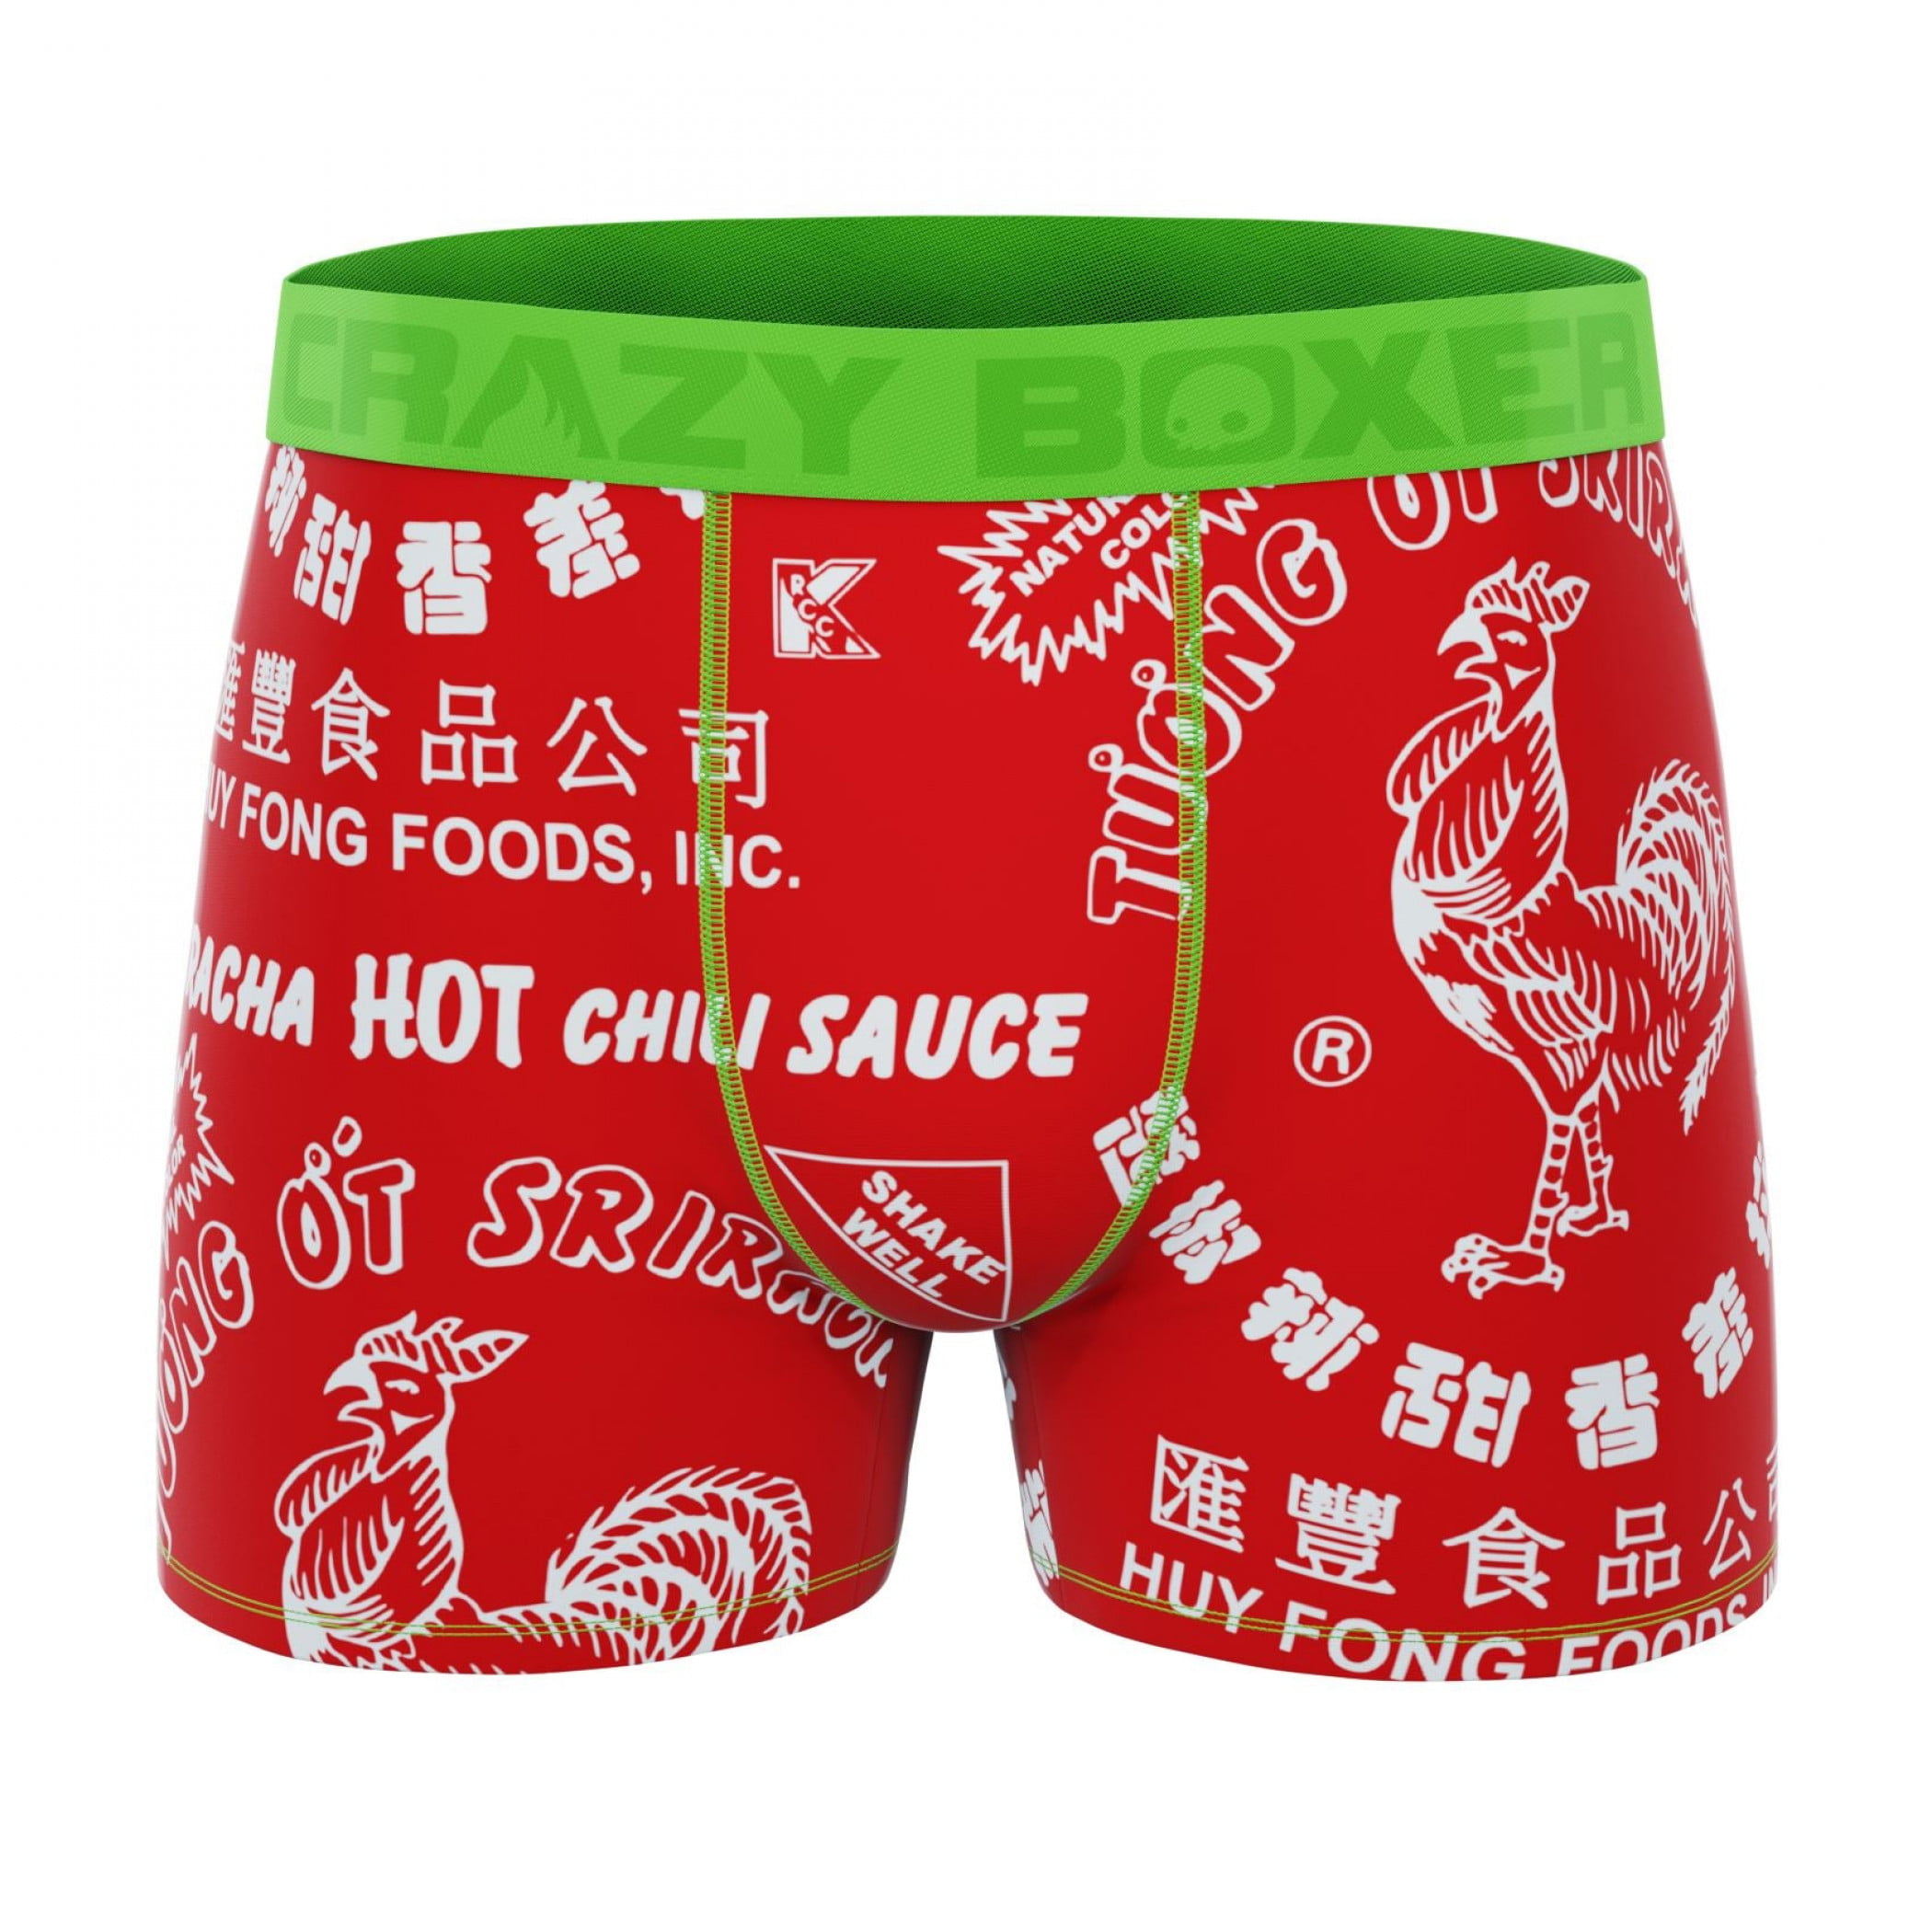 Size M 32-34" NEW 2 Pack Men's Christmas Vacation Griswold Family Boxer Briefs